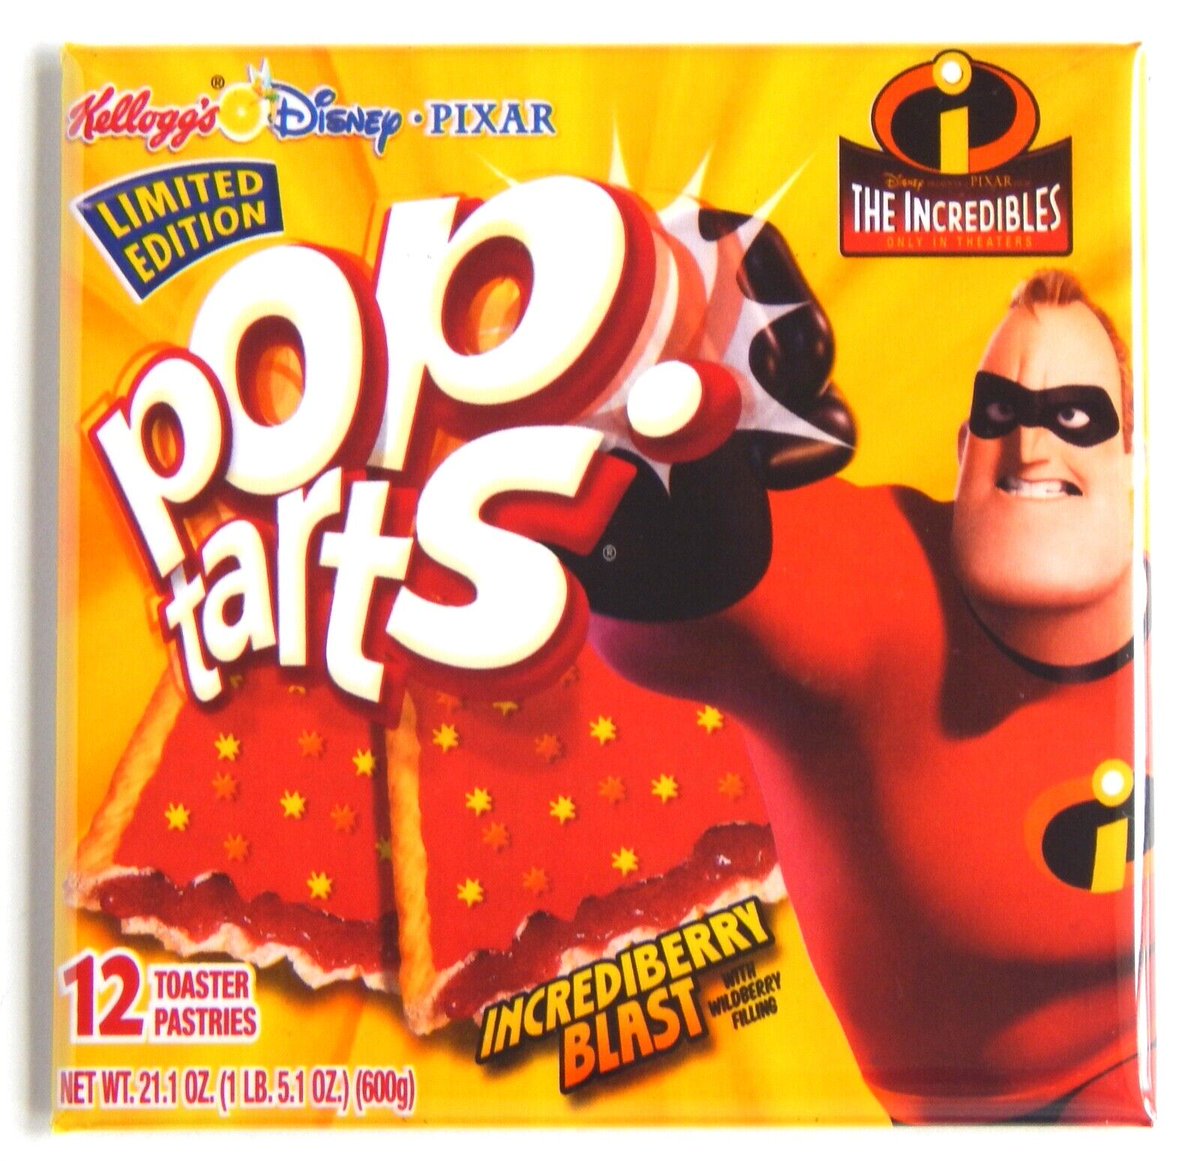 Incrediberry Blast Pop-Tarts (2004-2005): A promotional item for 'The Incredibles', these Pop-Tarts featured a standard crust, 'wildberry' filling, red icing, and red & yellow star-shaped sprinkles